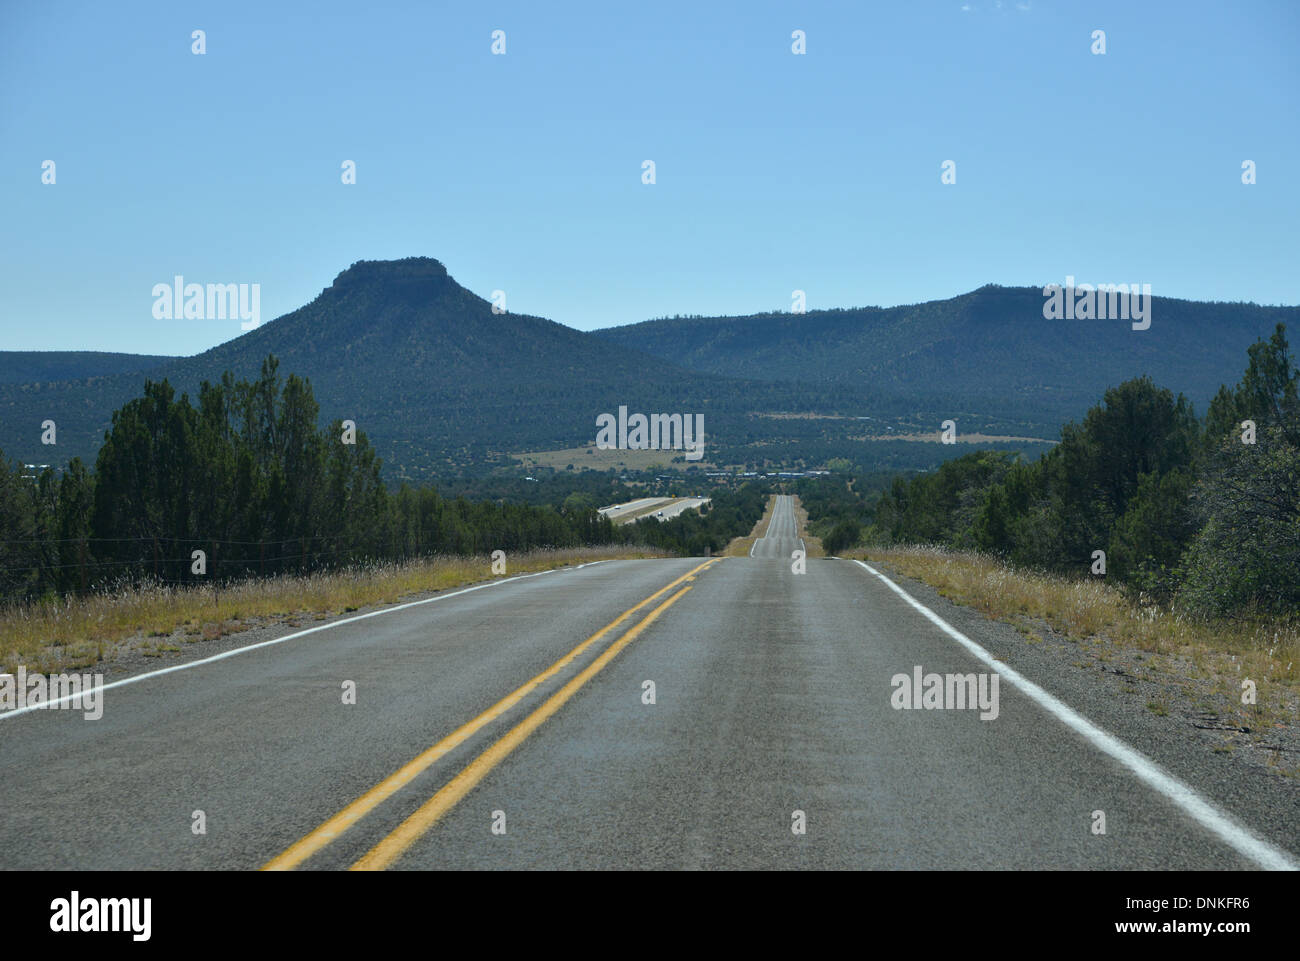 route-66-new-mexico-usa-long-straight-road-disappears-over-rolling-DNKFR6.jpg